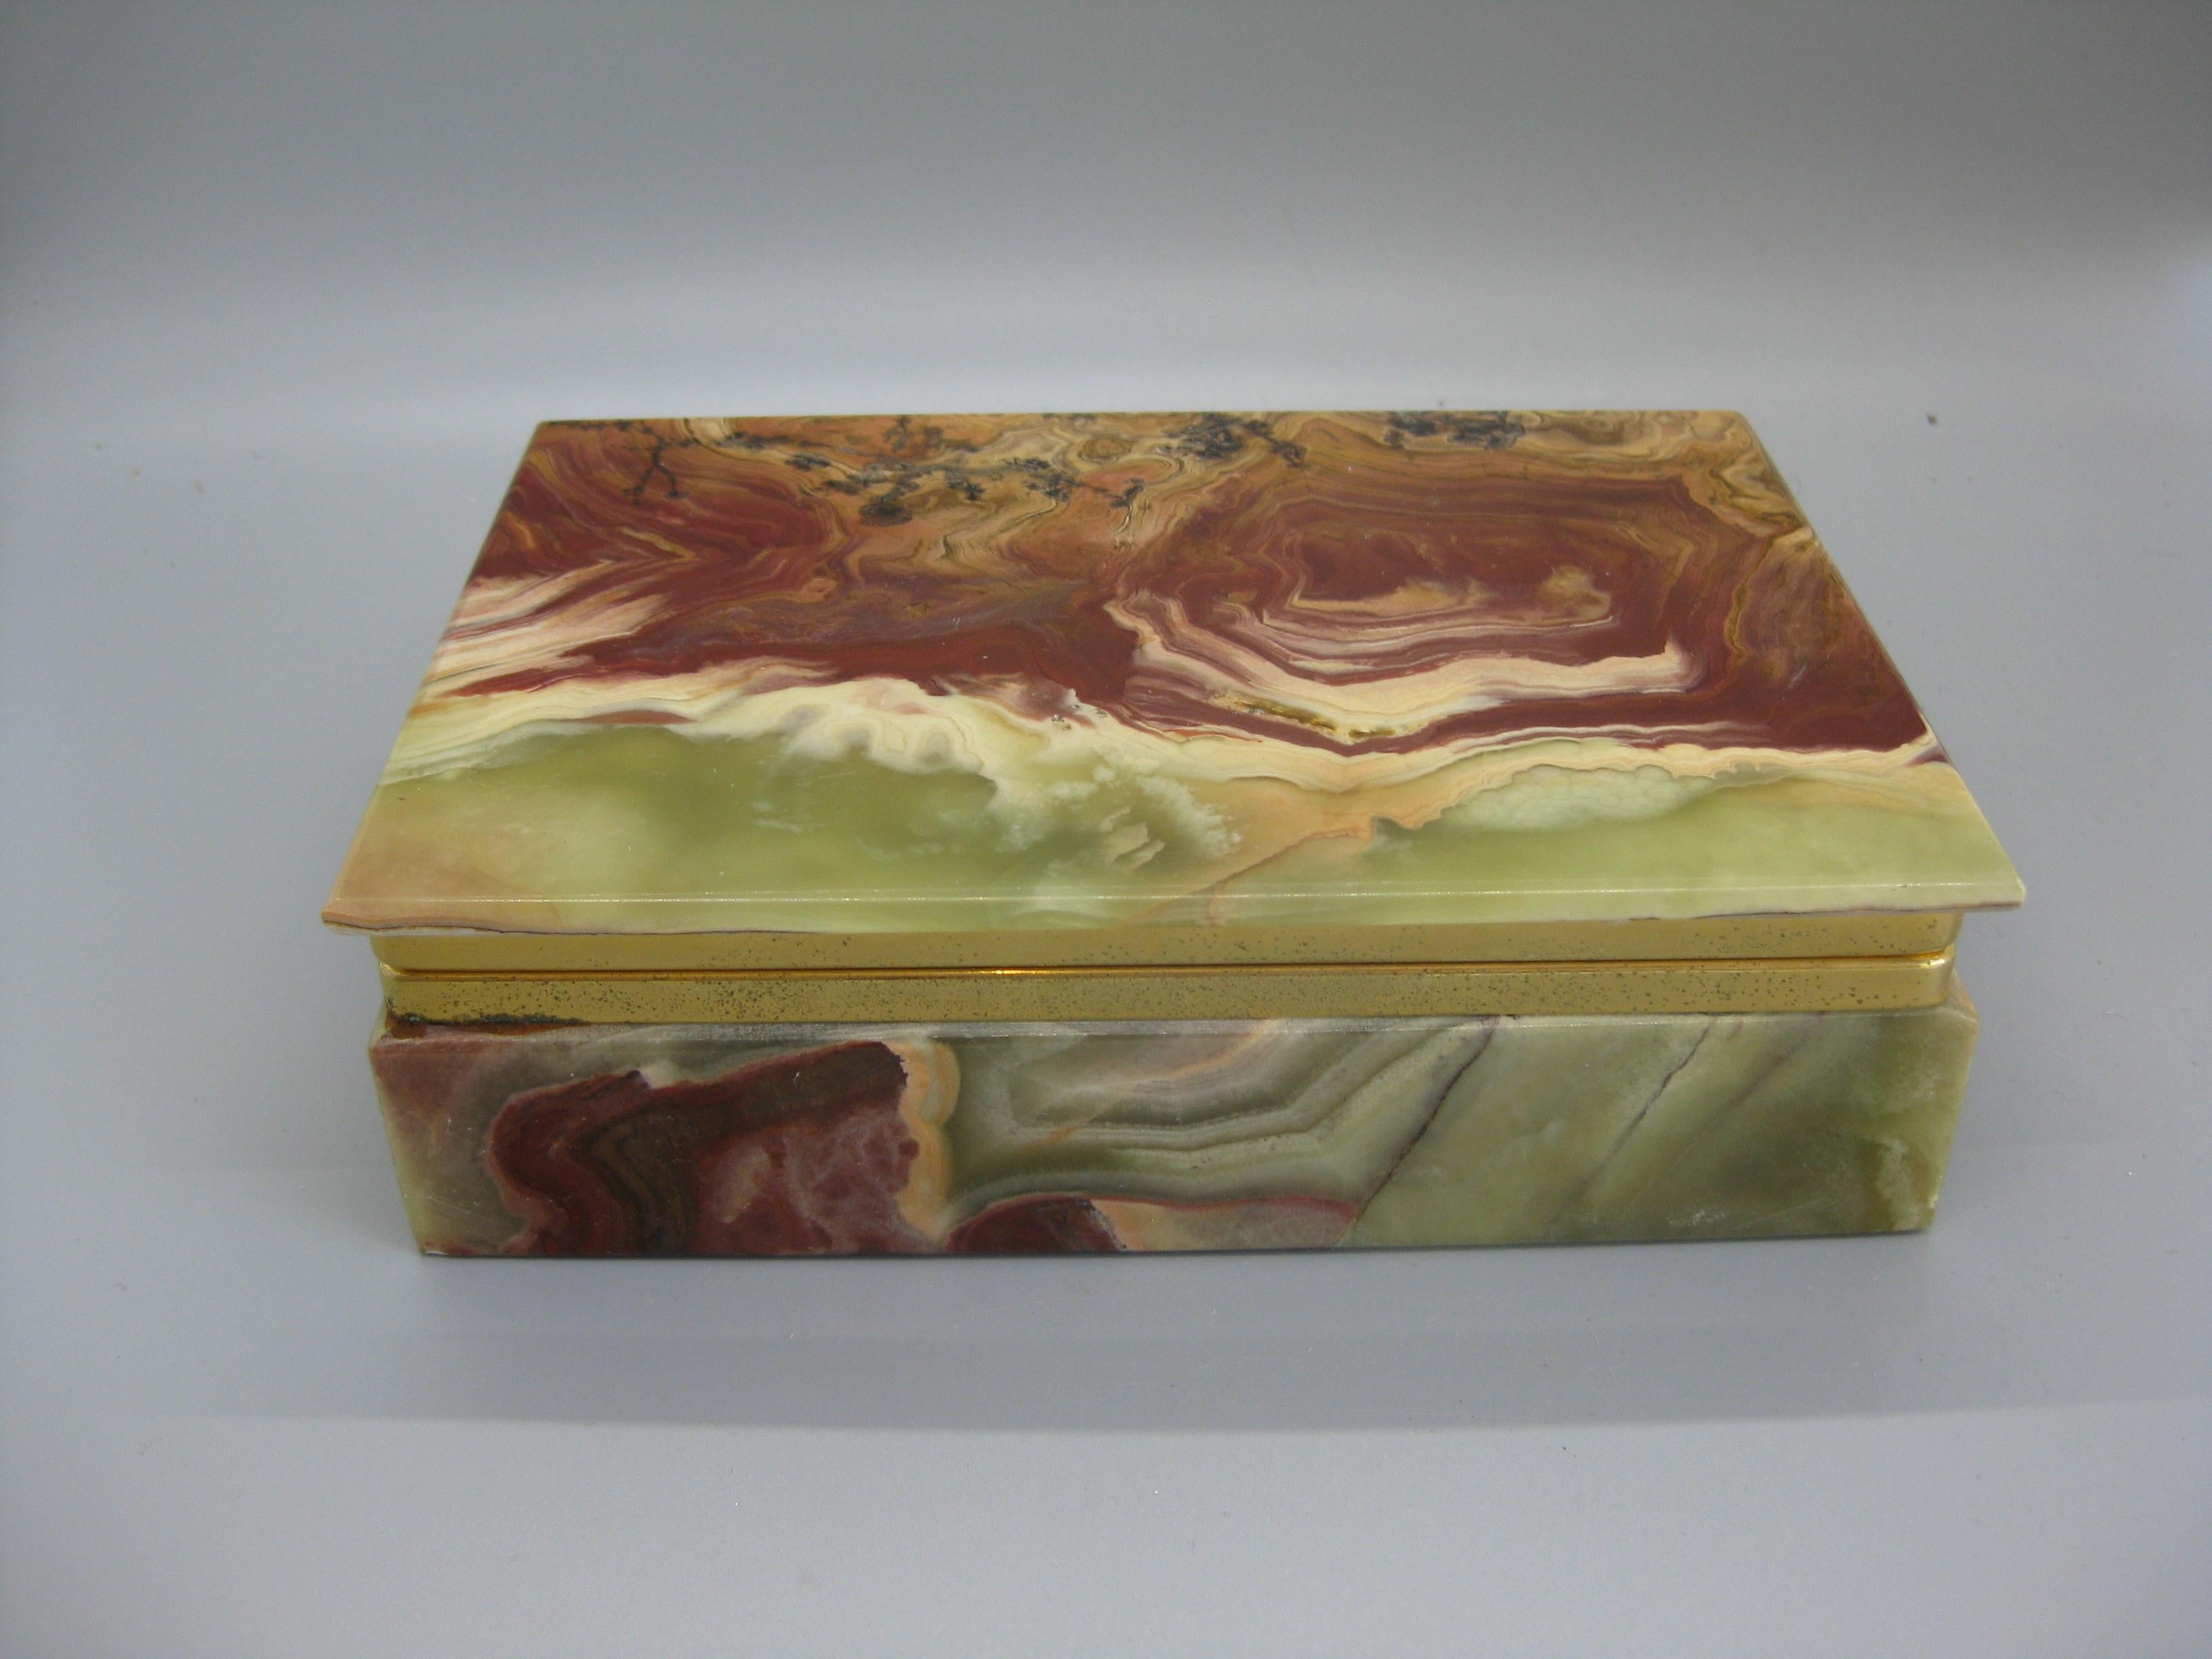 Beautiful decorative colorful natural onyx stone stash/jewelry box. Has brass accents. The natural color and form is wonderful. In very nice original condition with stunning colors. handmade and opens and closes as it should. Measures: approximate 6